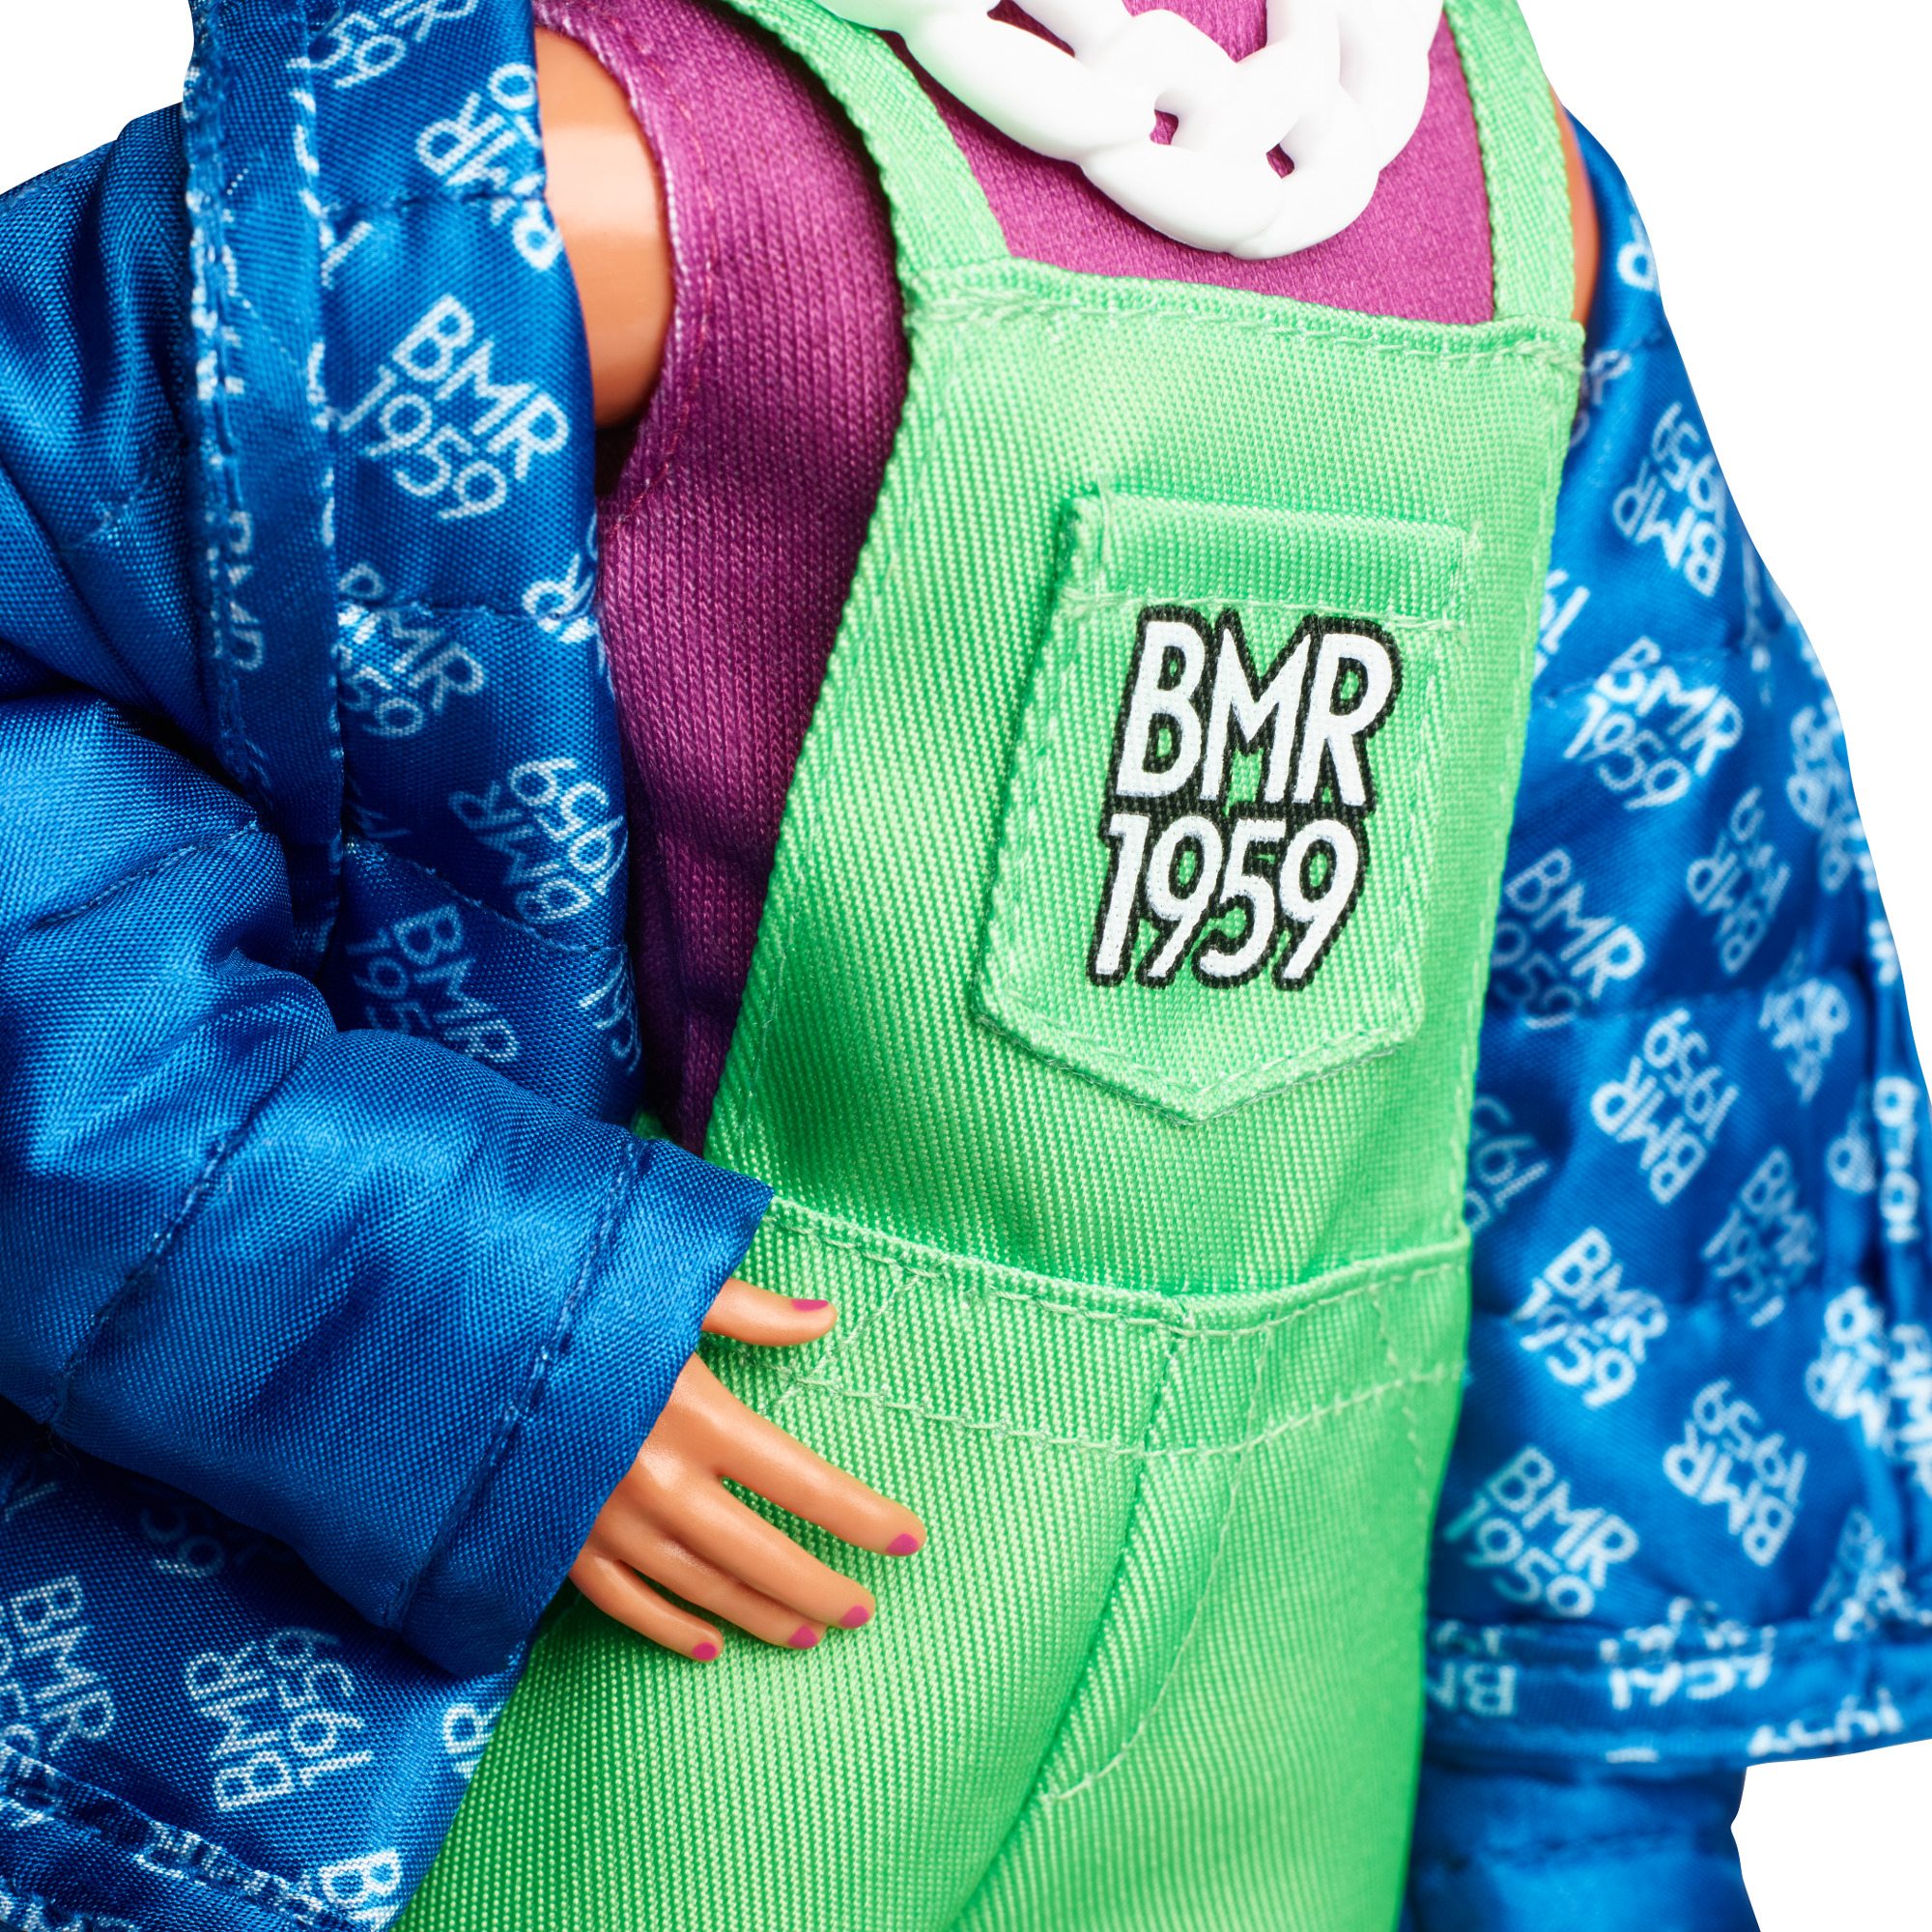 Barbie Bmr1959 Doll - Neon Overalls & Puffer Jacket - image 4 of 7